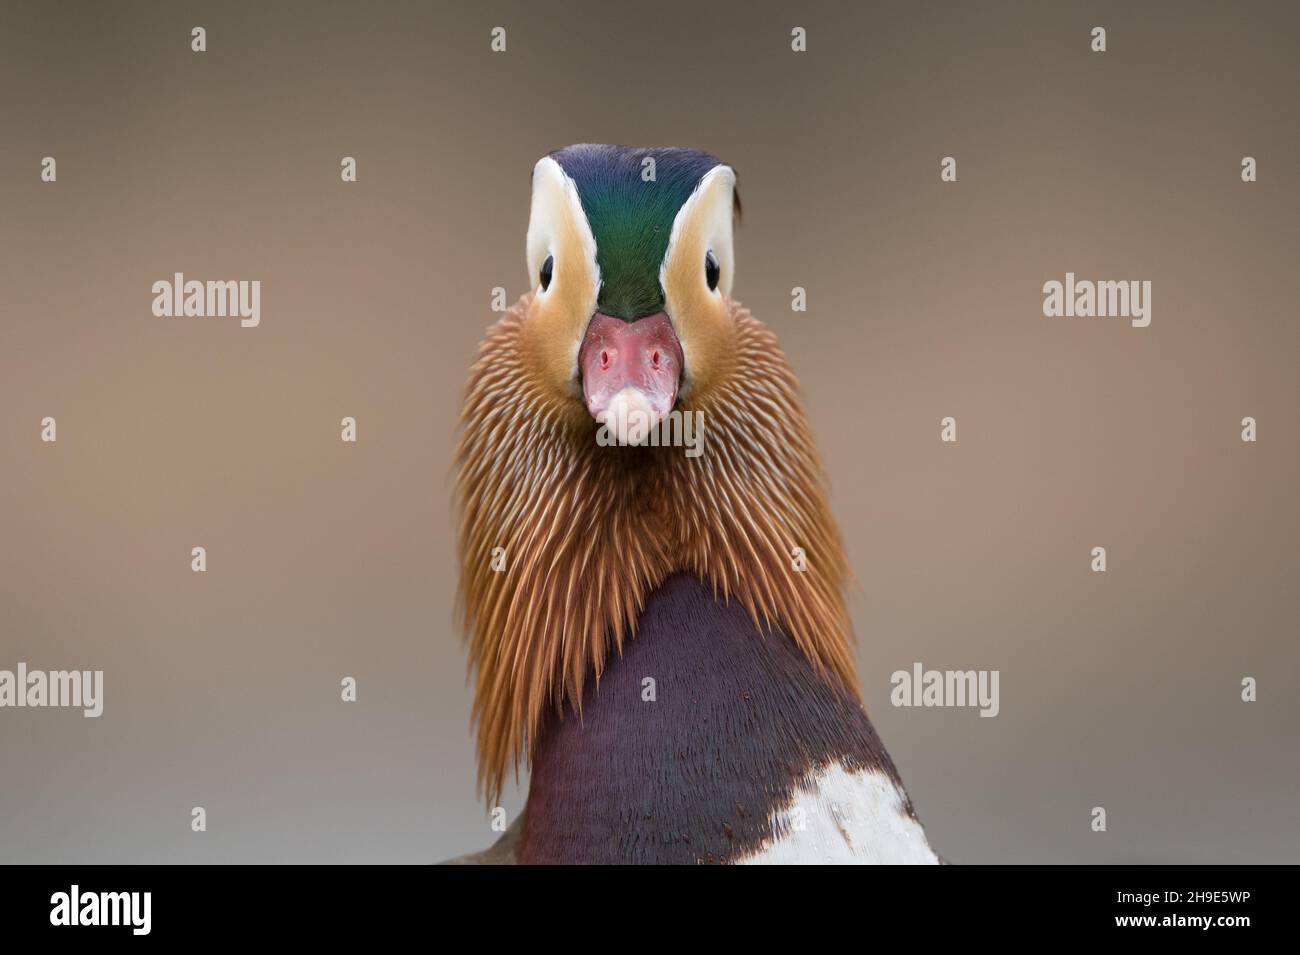 Male Mandarin duck (Aix galericulata) head frontal shot. Exceptional orange feathers. Blurred brown background. Stock Photo